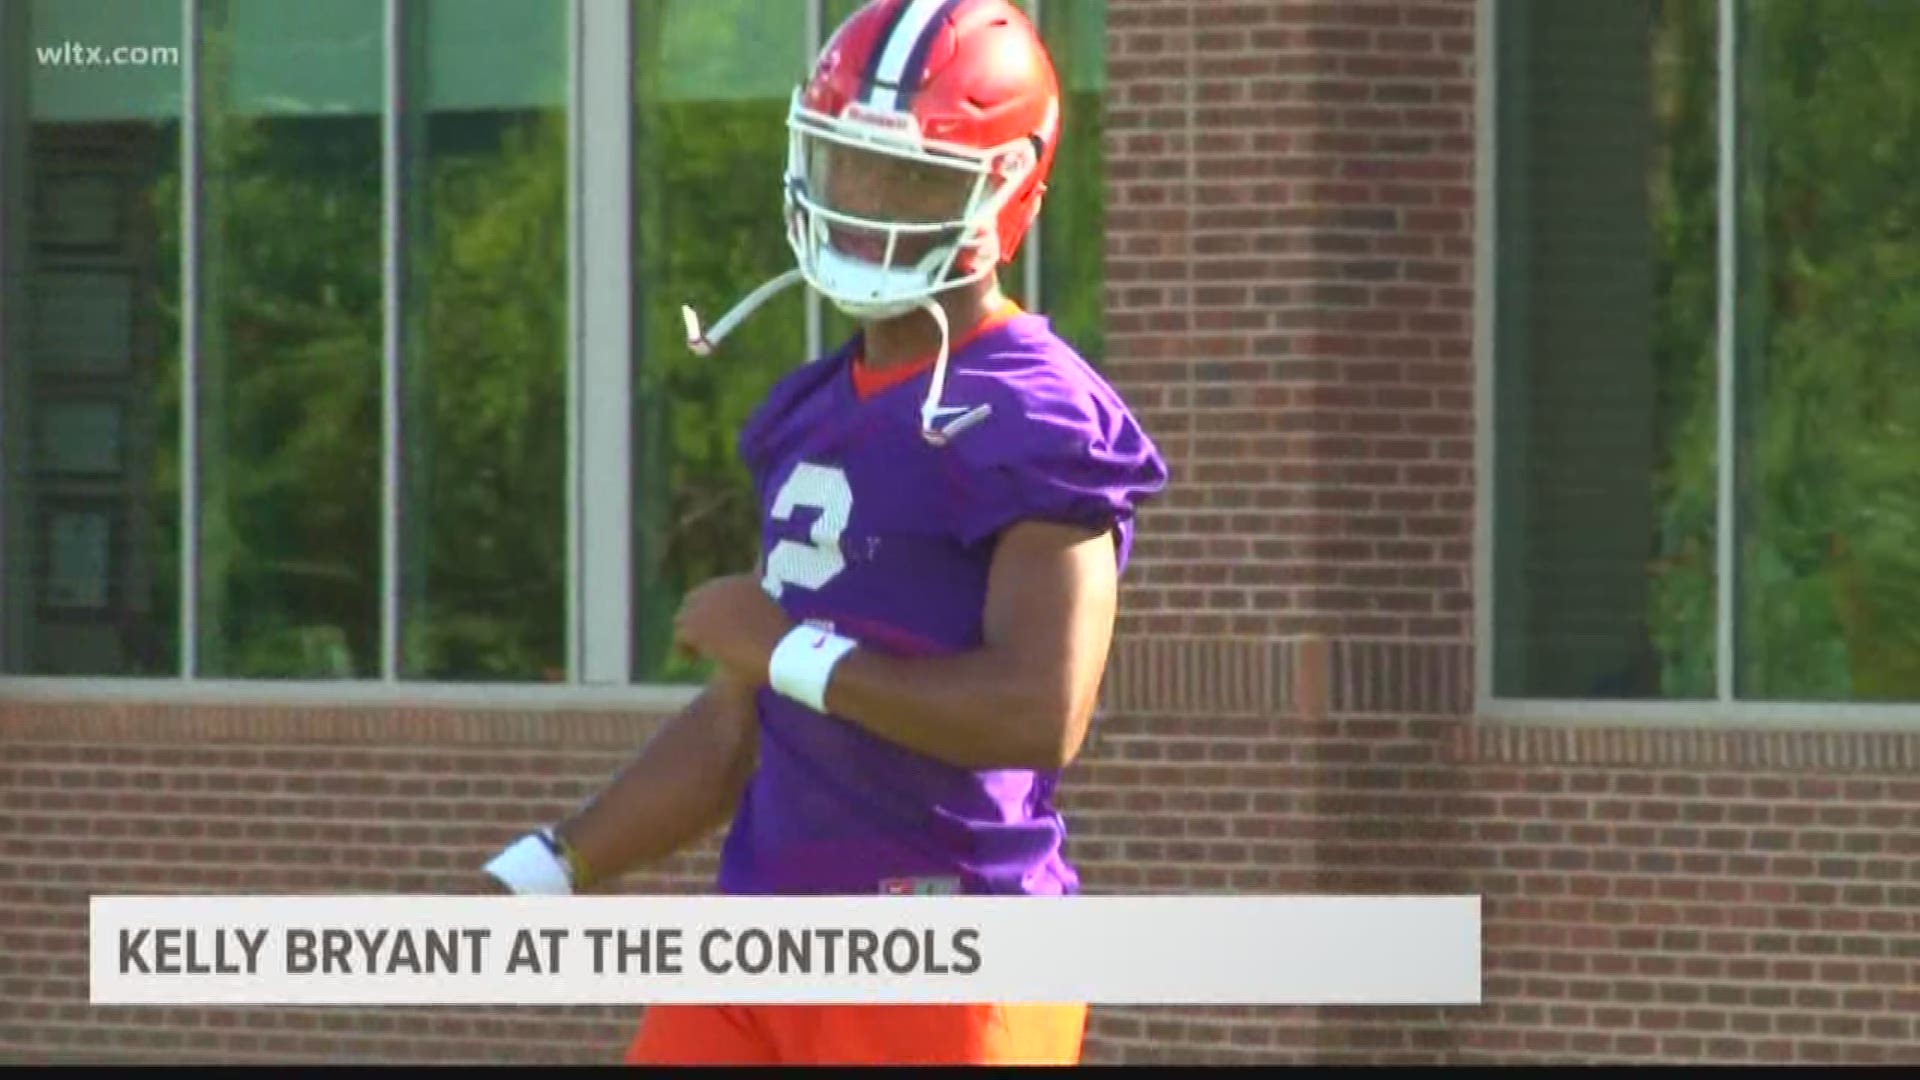 He may be the returning starter at quarterback, but Kelly Bryant knows he will have to earn that job all over again as preseason camp continues.